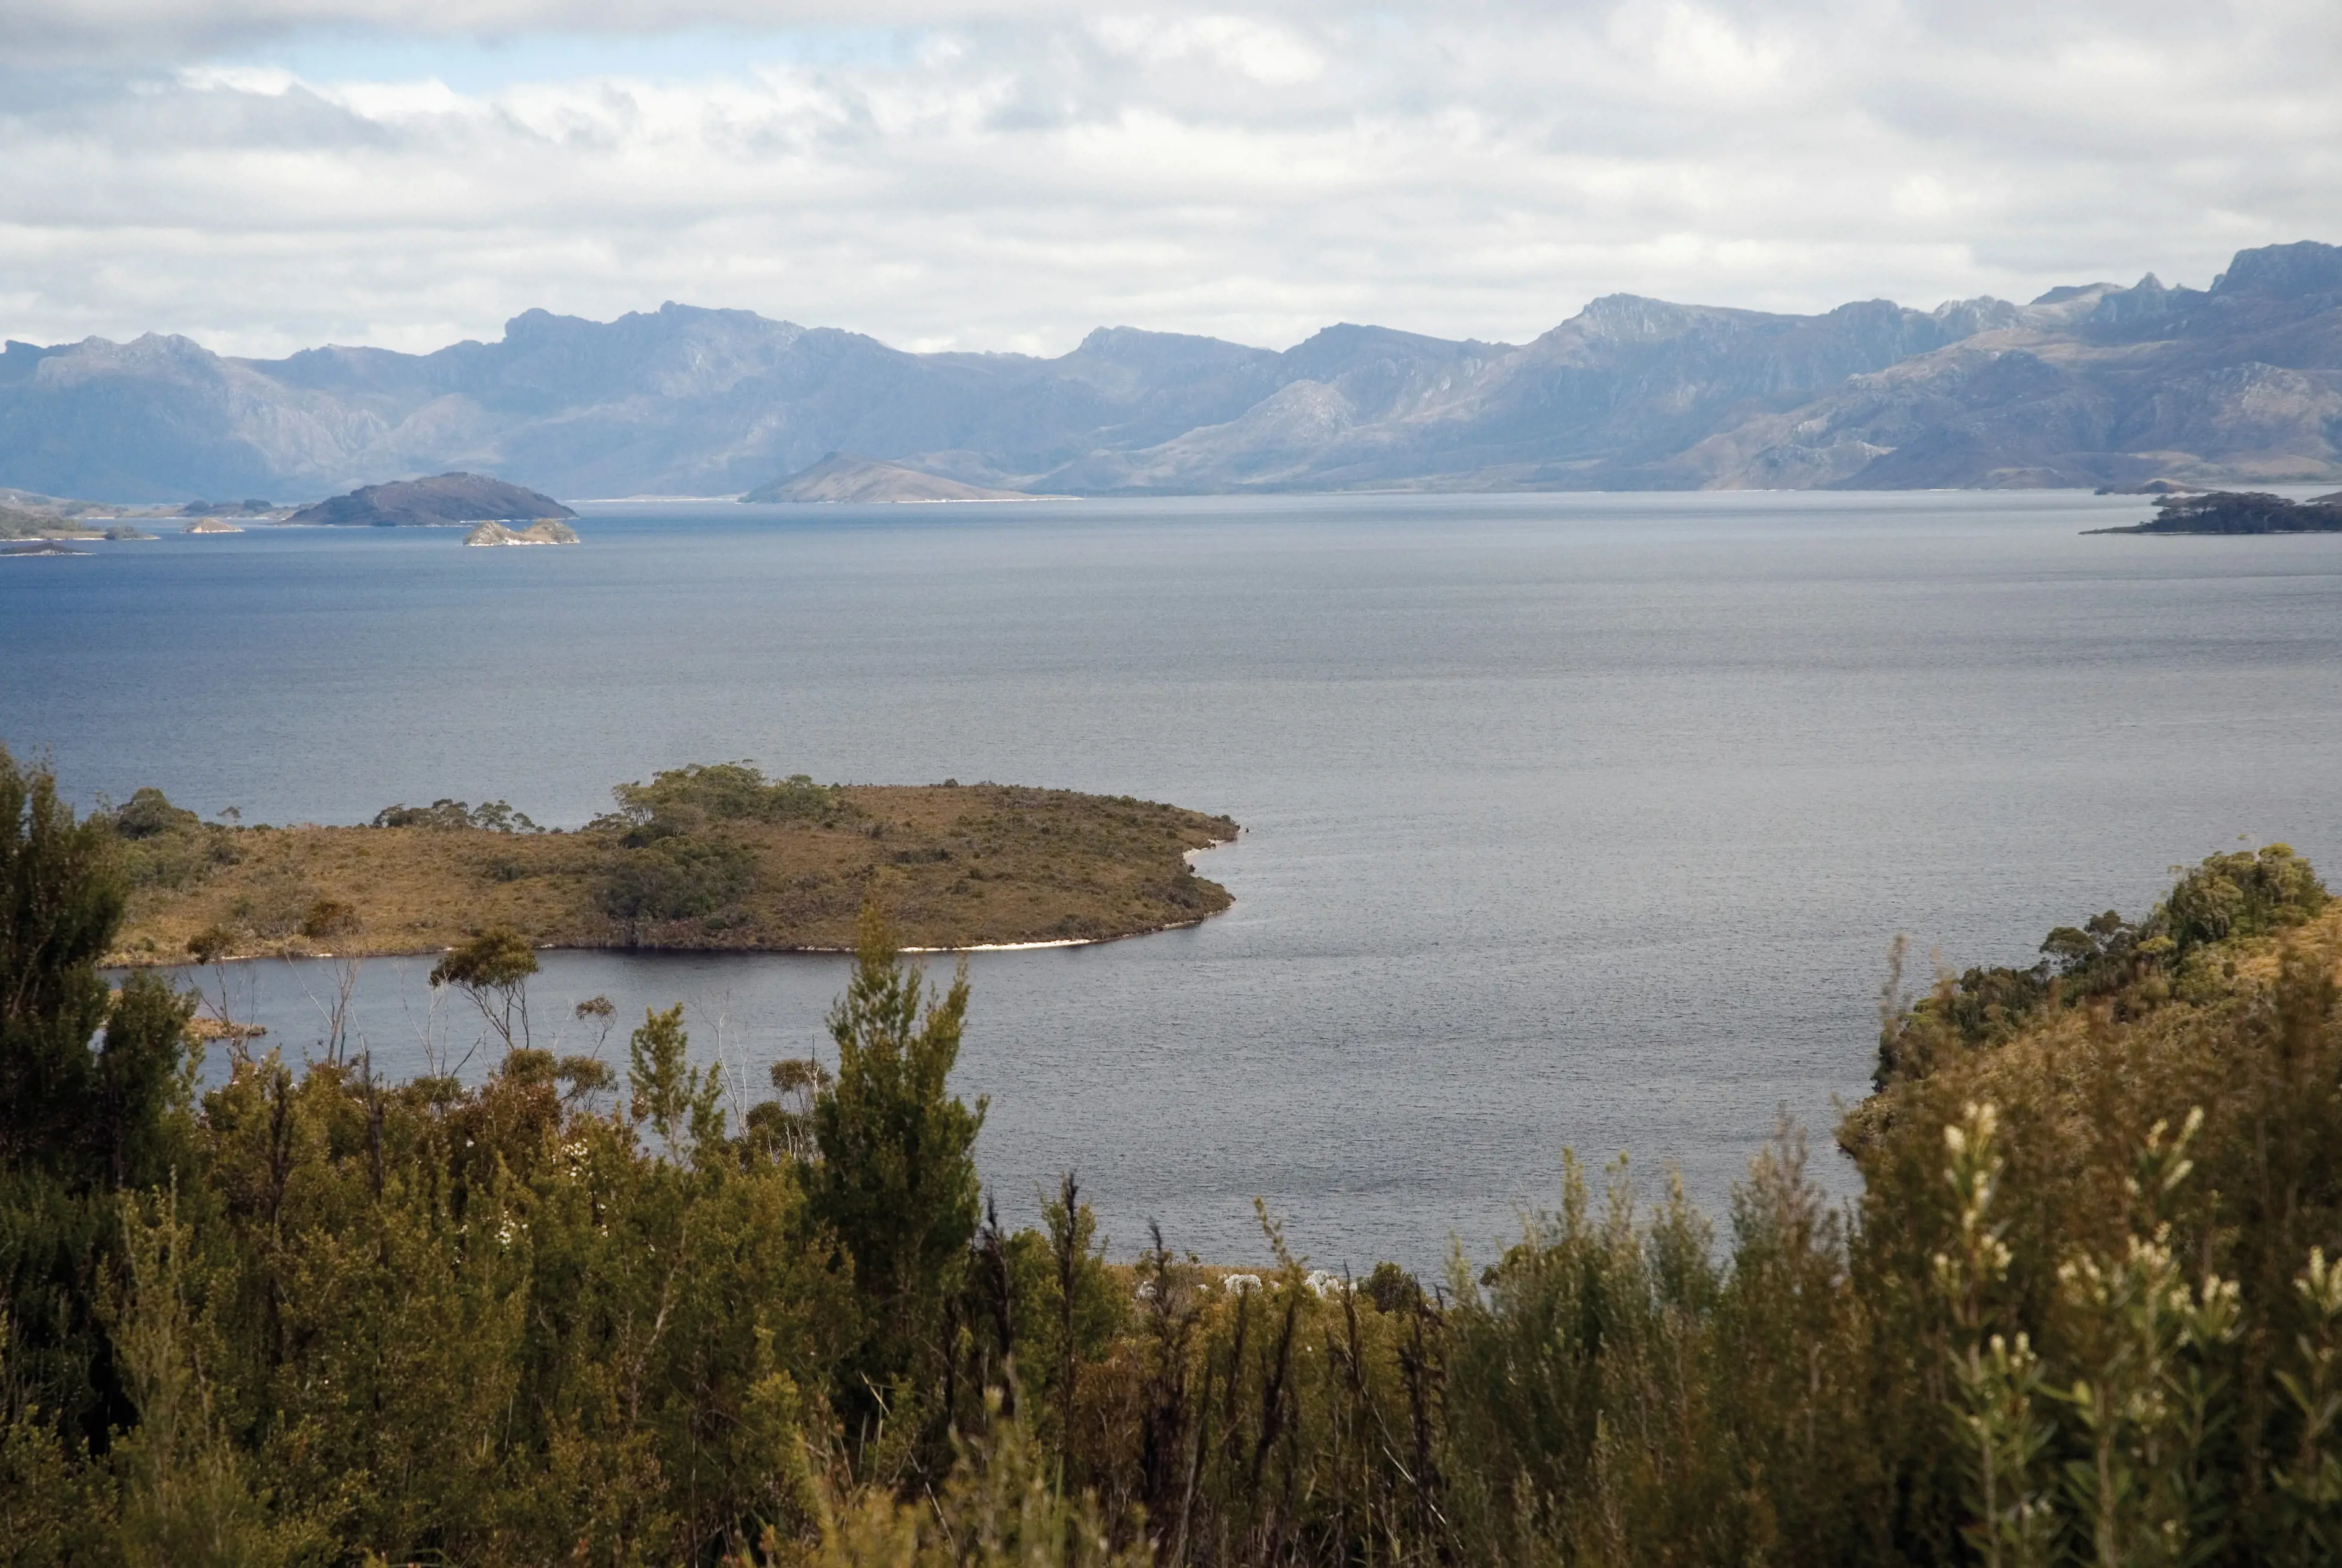 Landscape view of Lake Pedder, with mountains in the backdrop.